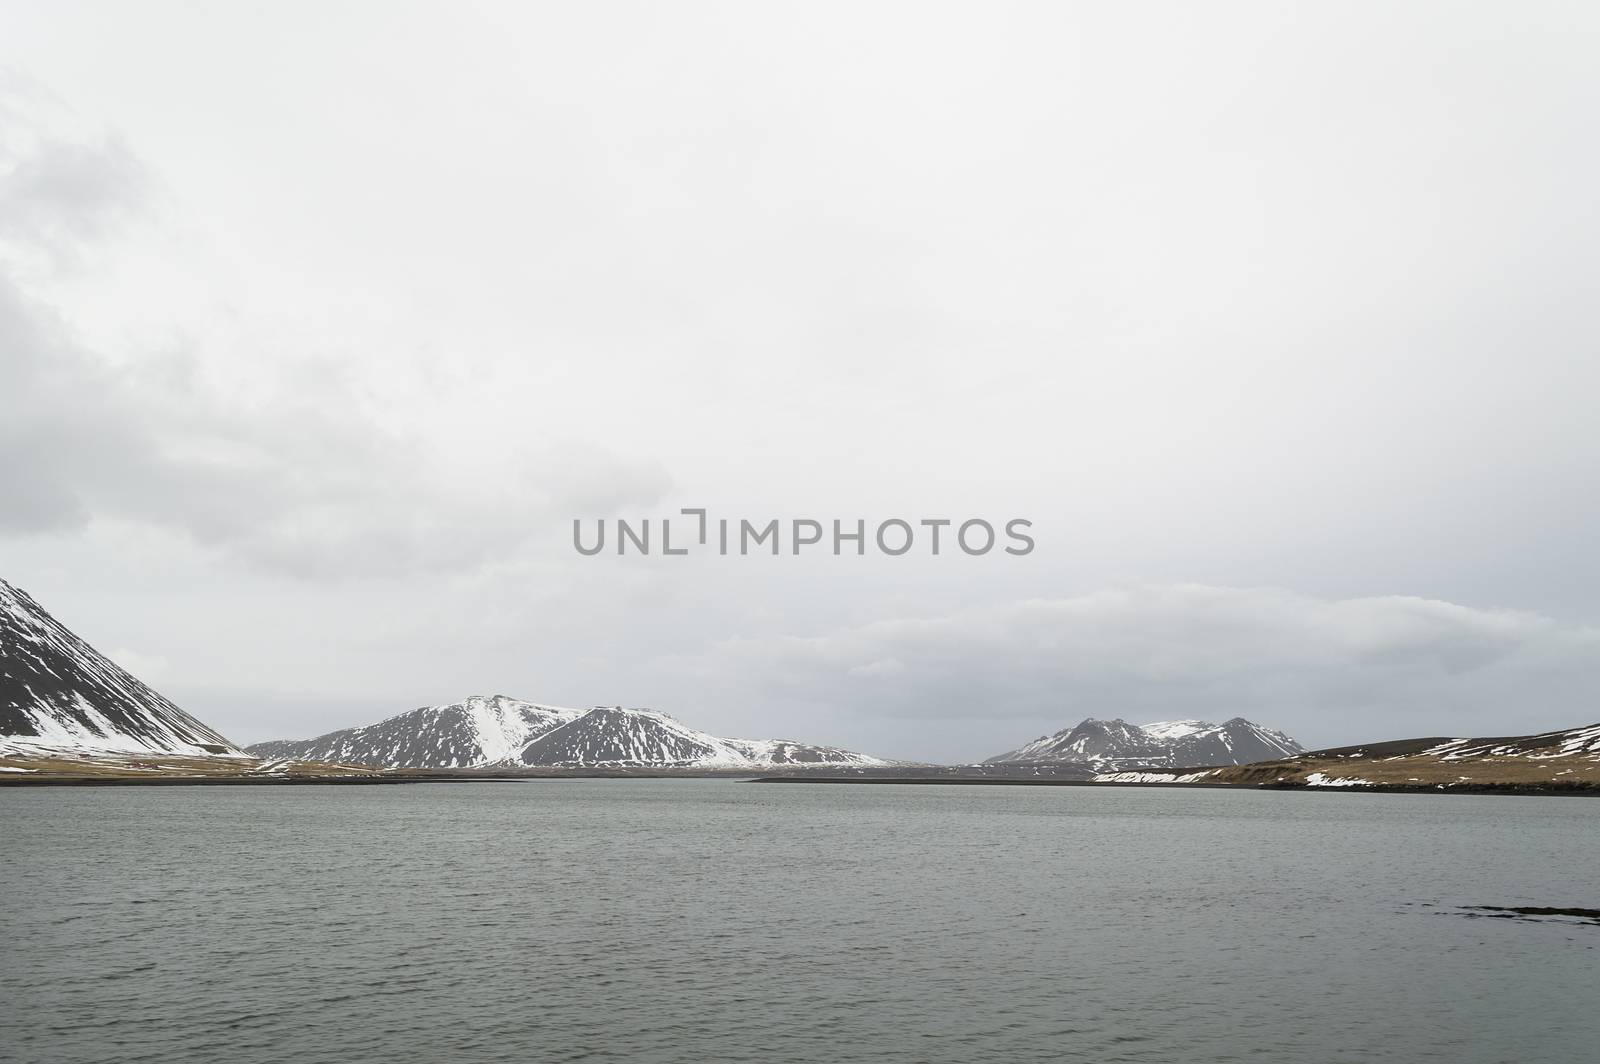 the iceland mountians and lake  around snaefellsnes